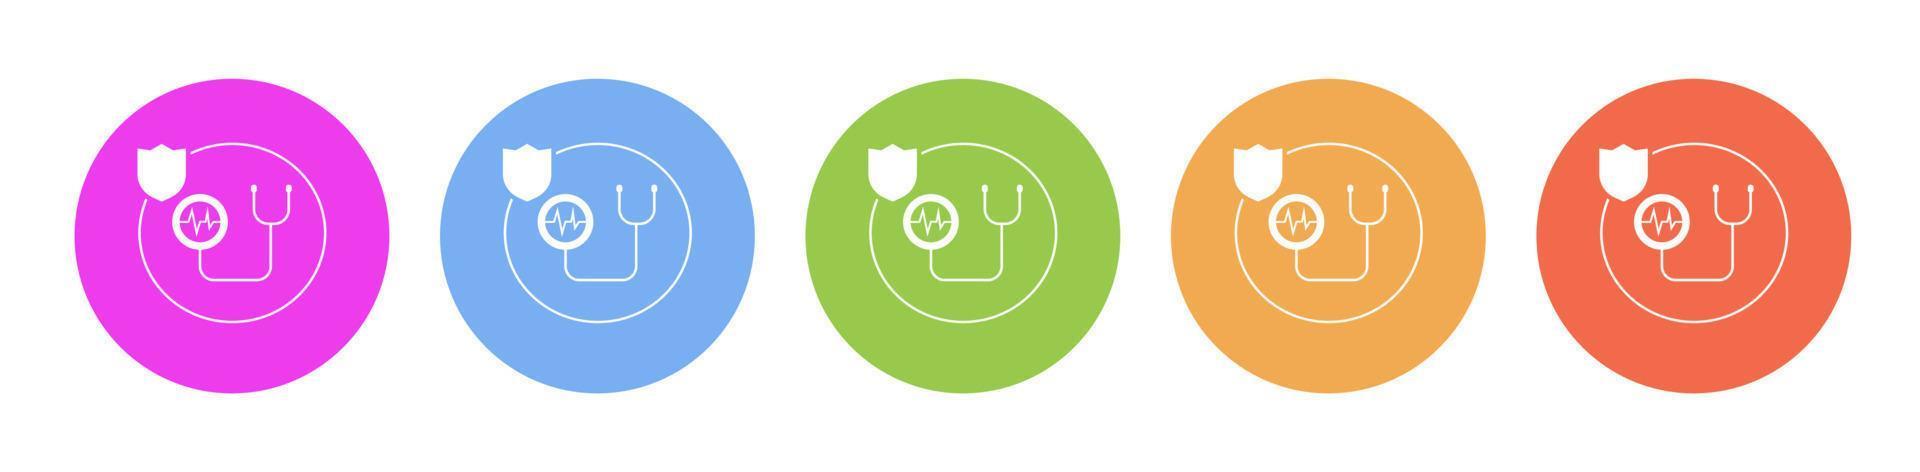 Multi colored flat icons on round backgrounds. human, insurance, health multicolor circle vector icon on white background